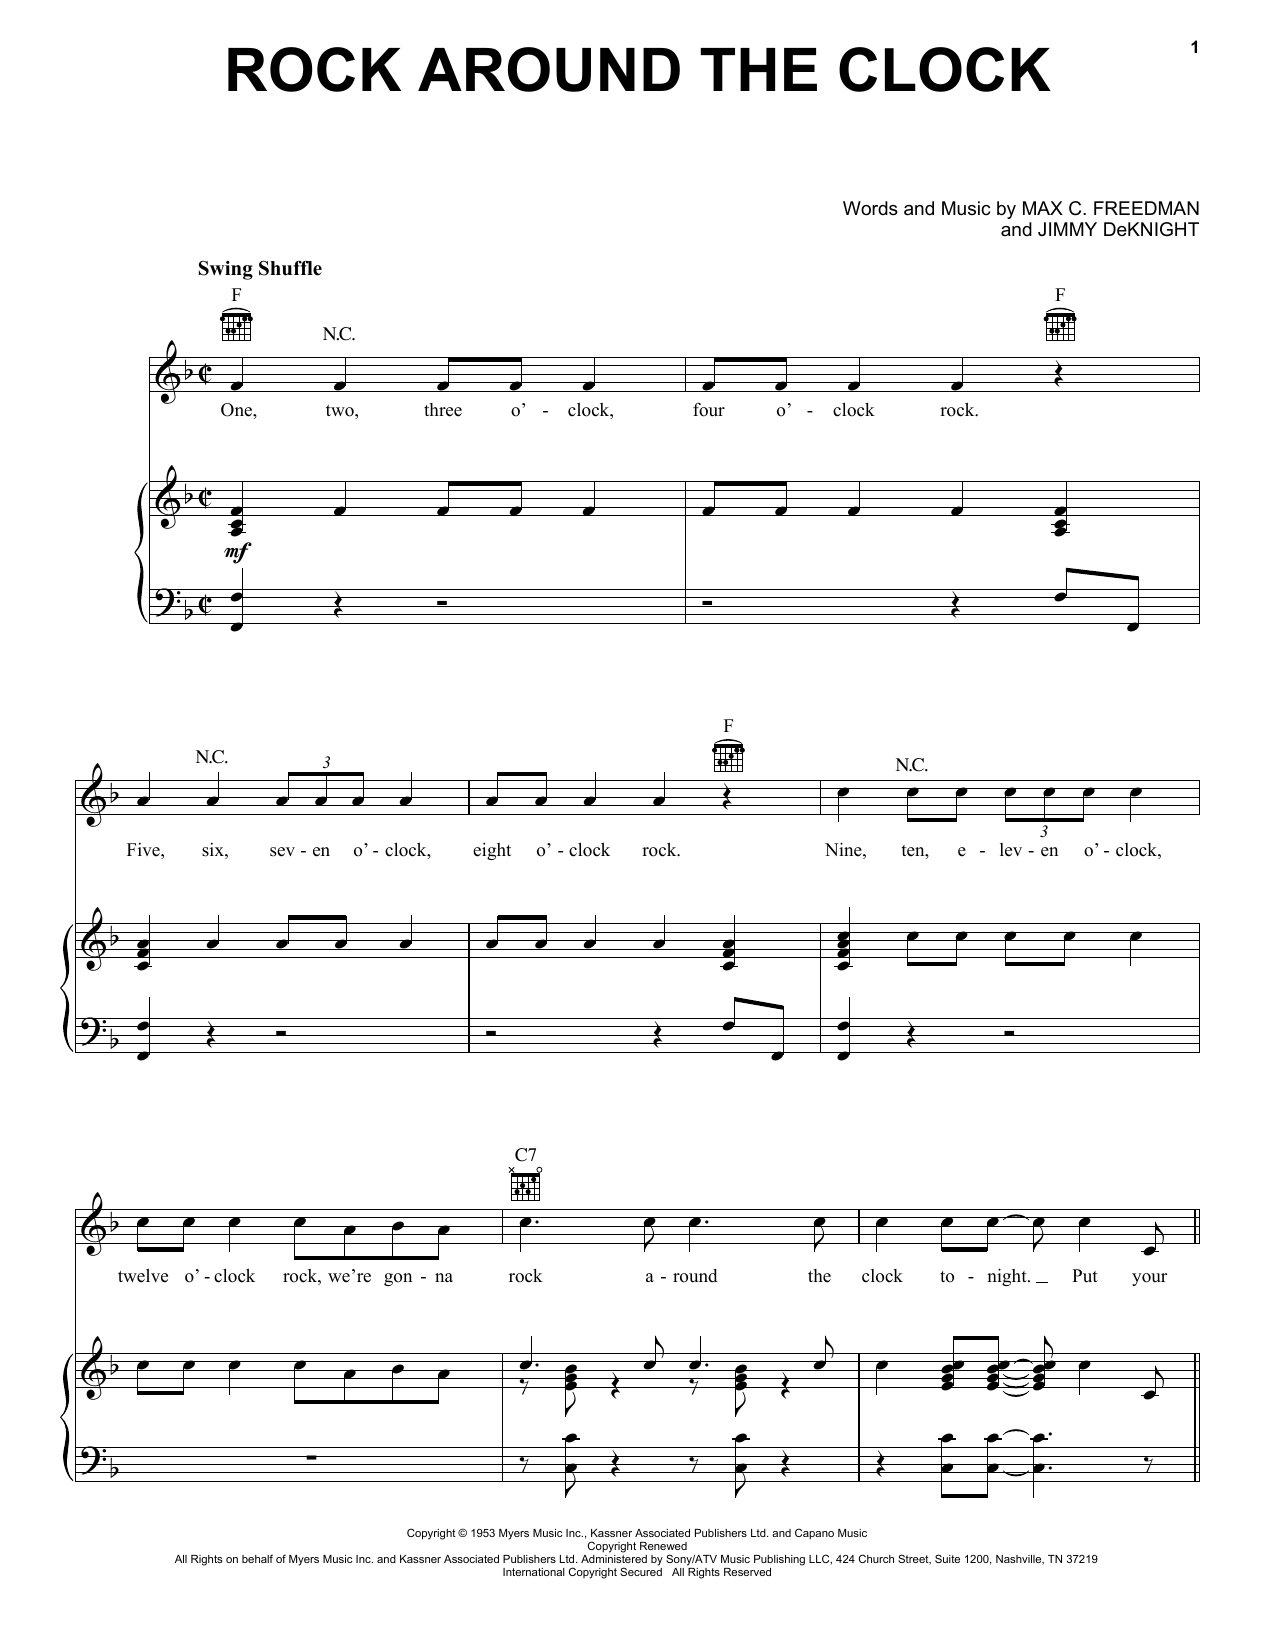 Download Bill Haley & His Comets Rock Around The Clock Sheet Music